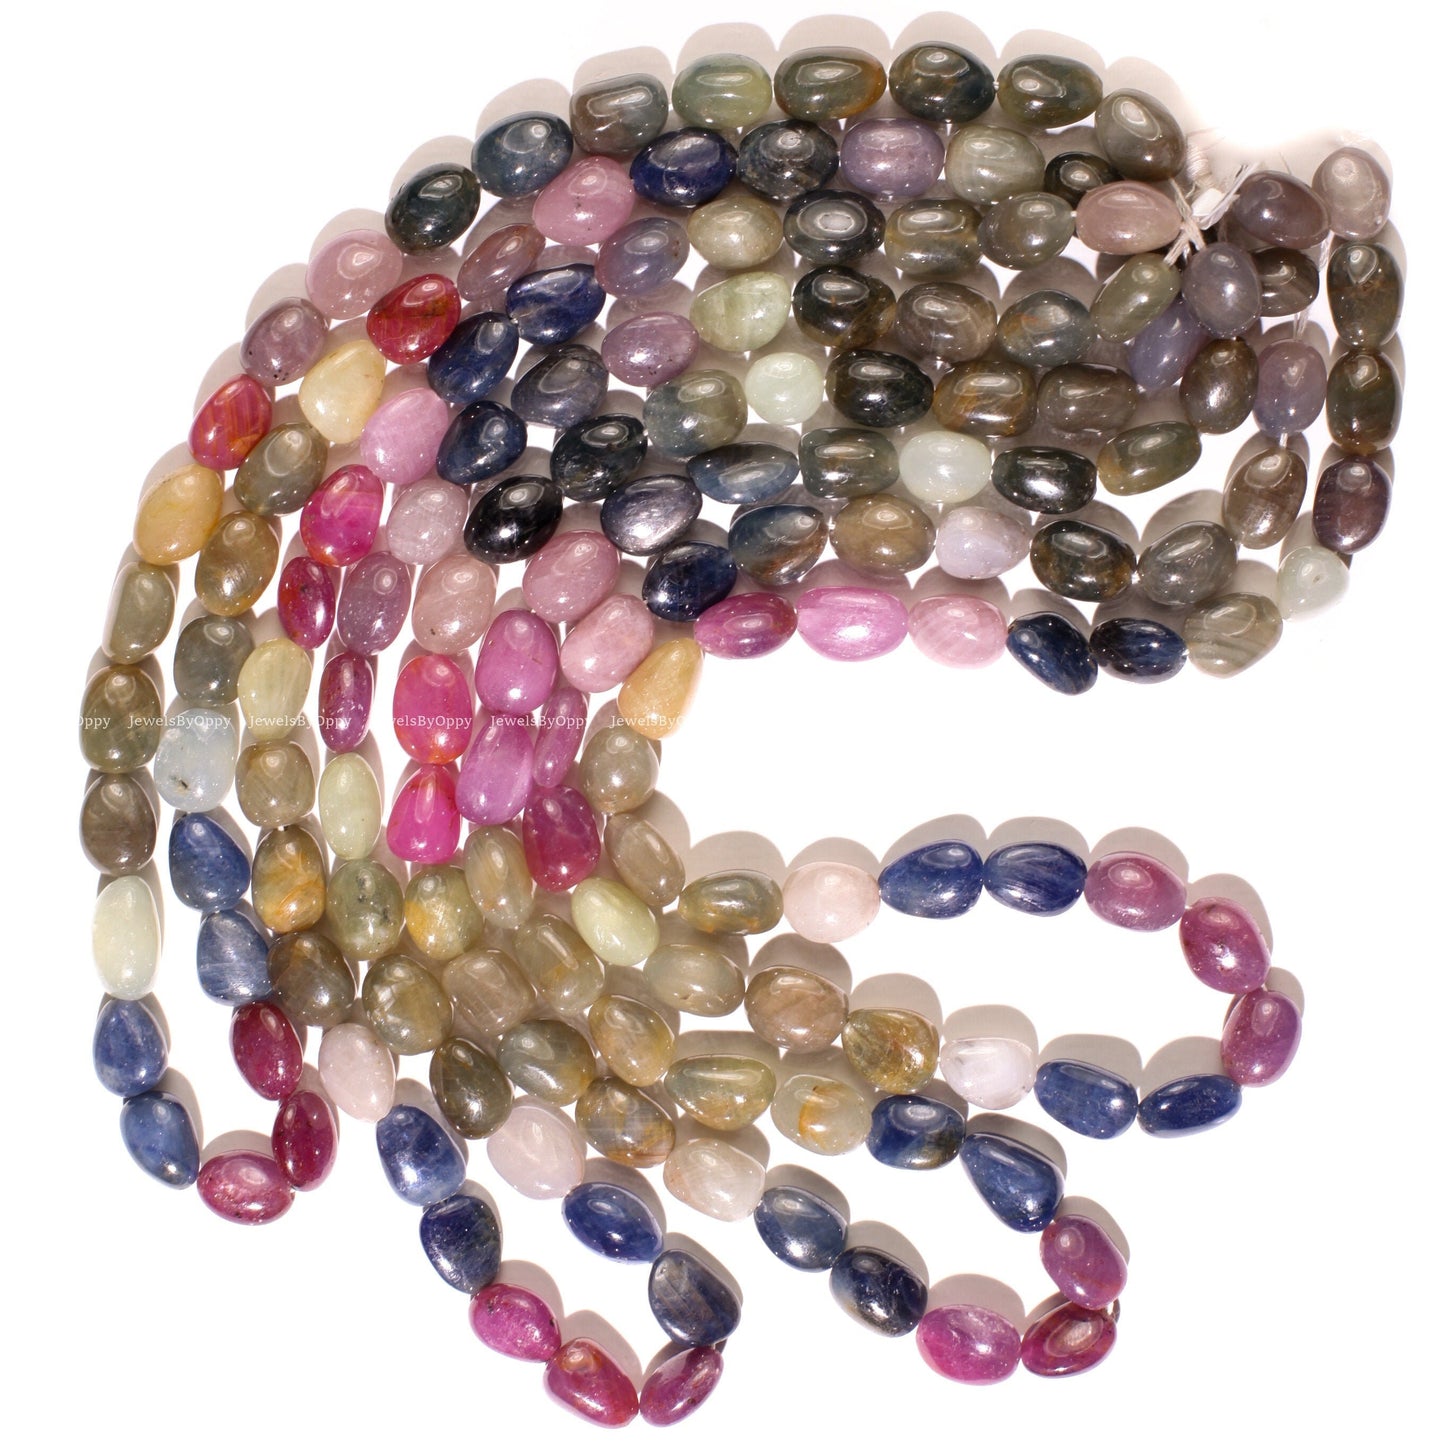 Natural Multi Sapphire Smooth Oval, 9x12-13mm Shaded Free Form Oval Nugget Gemstone, Jewelry making Beads 6&quot;, 12&quot; Strand.